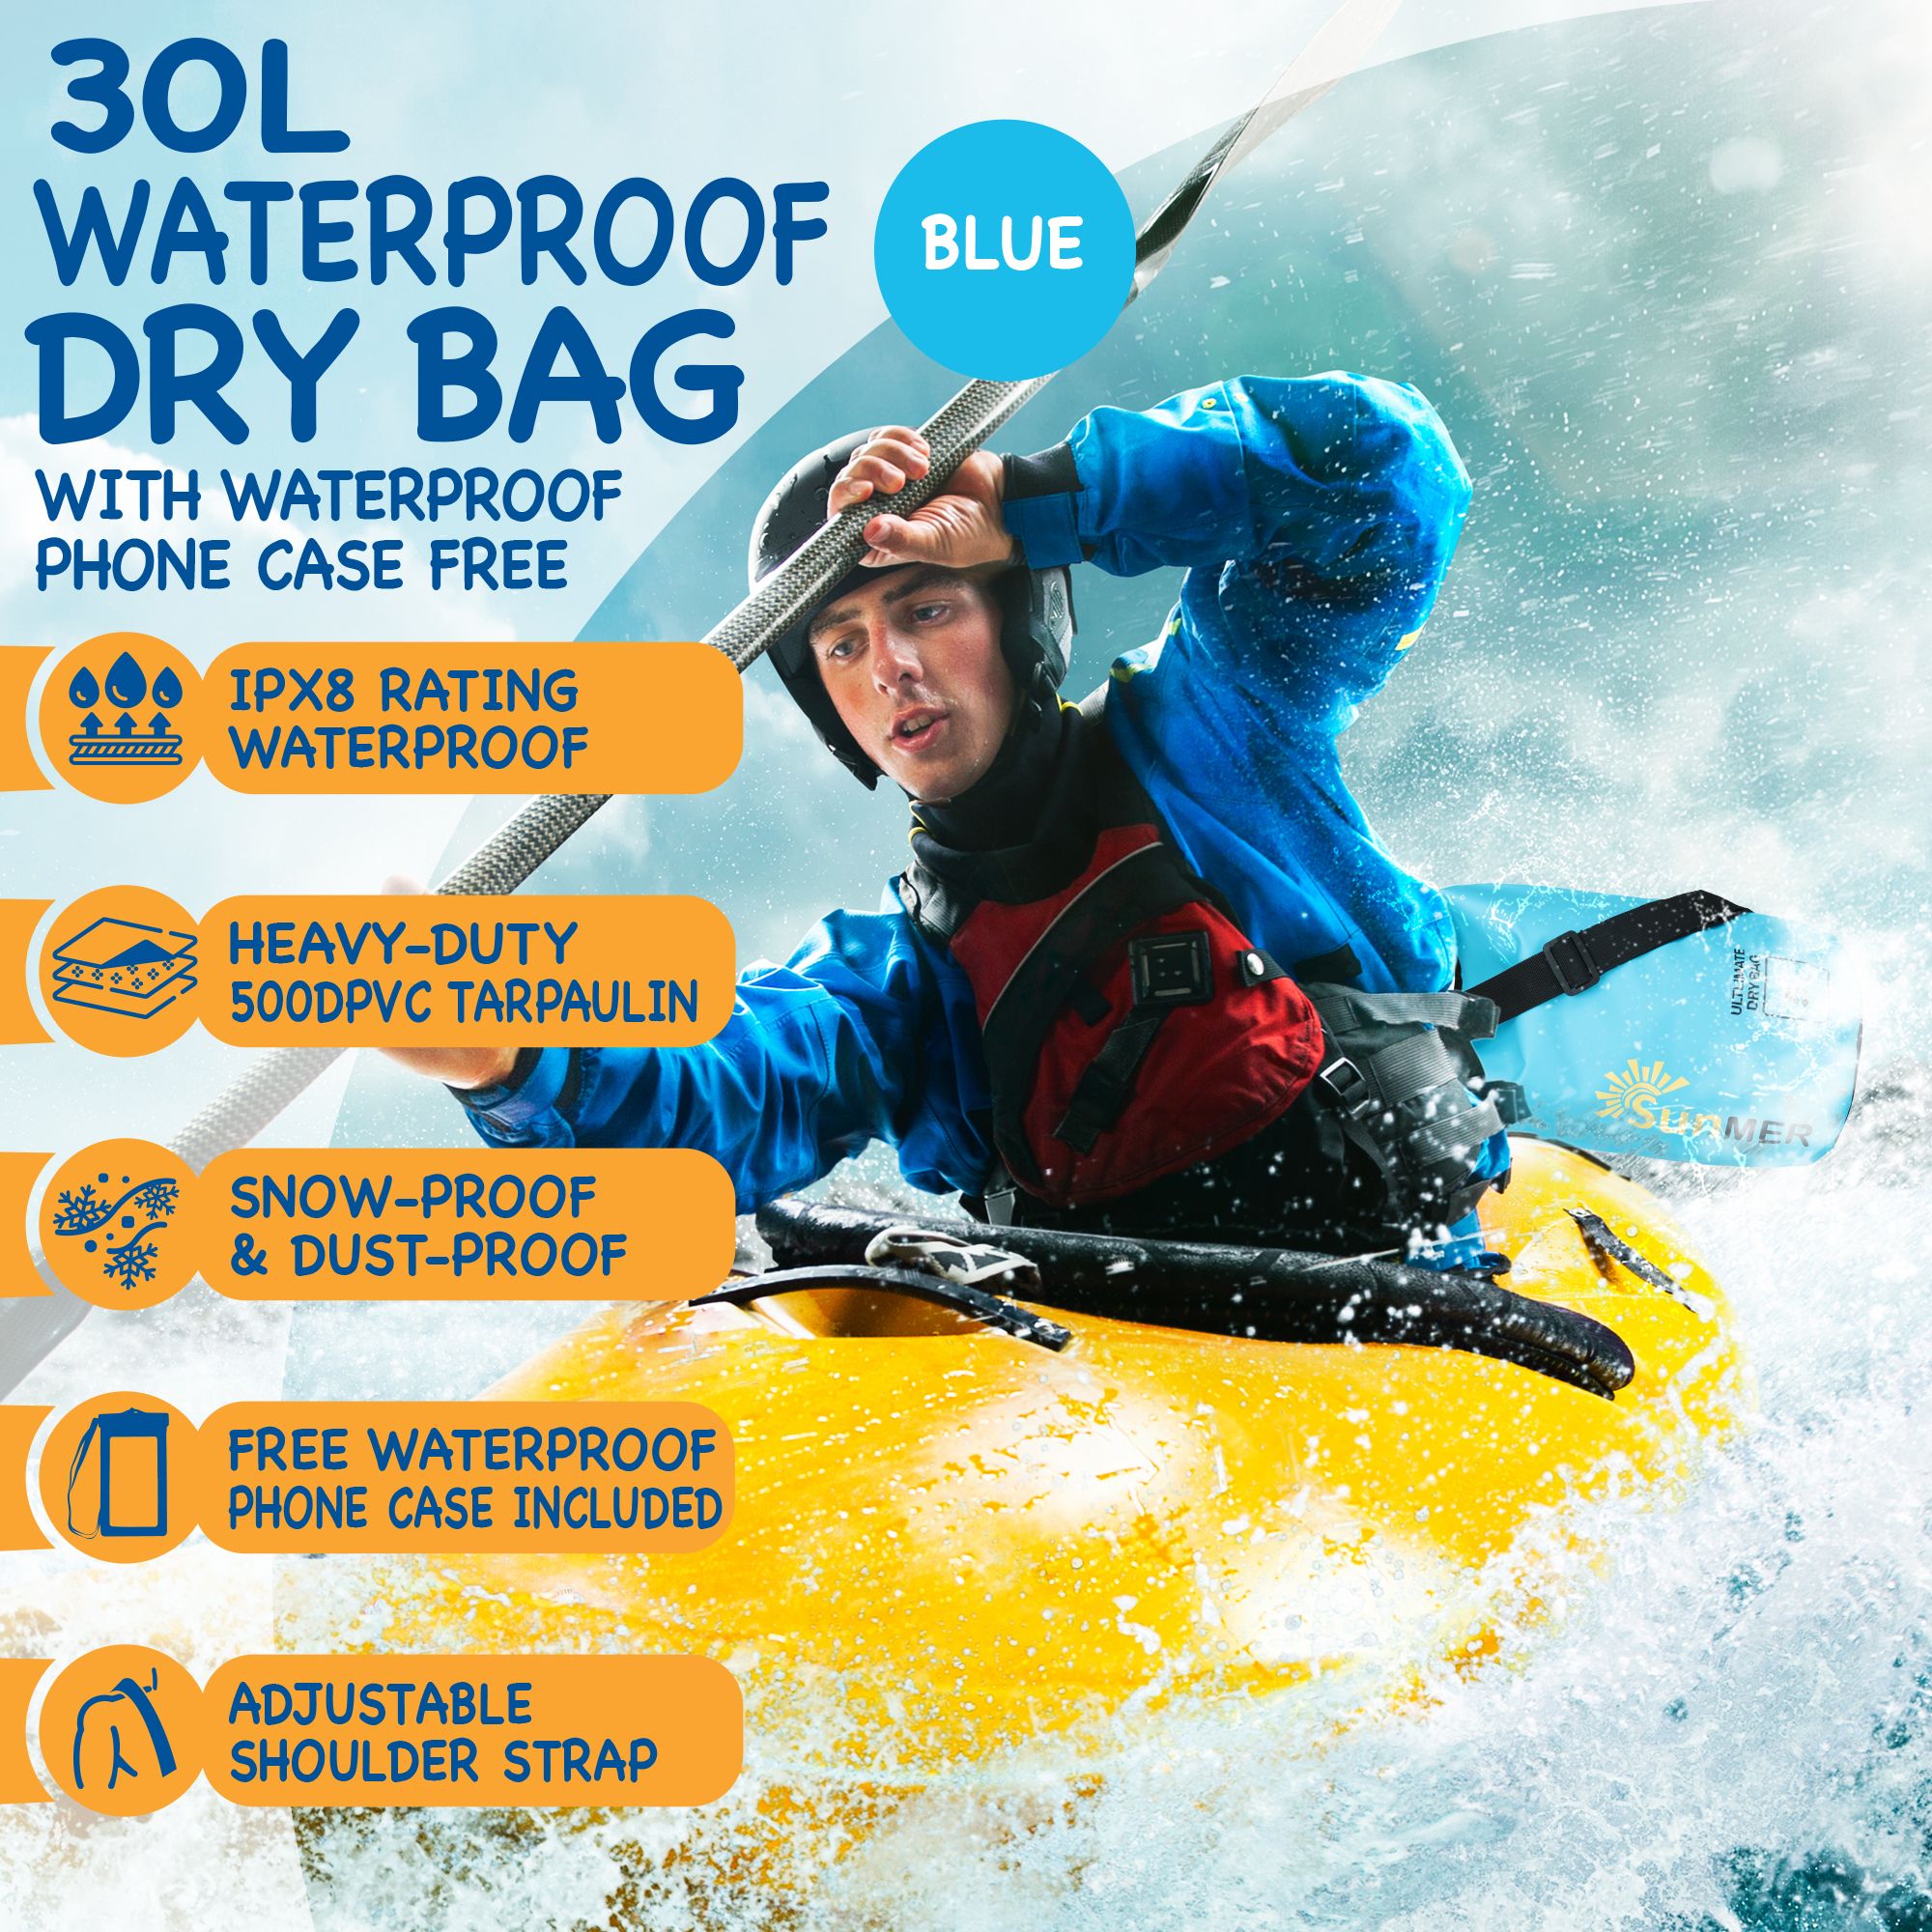 SUNMER 30L Dry Bag With Waterproof Phone Case - Blue